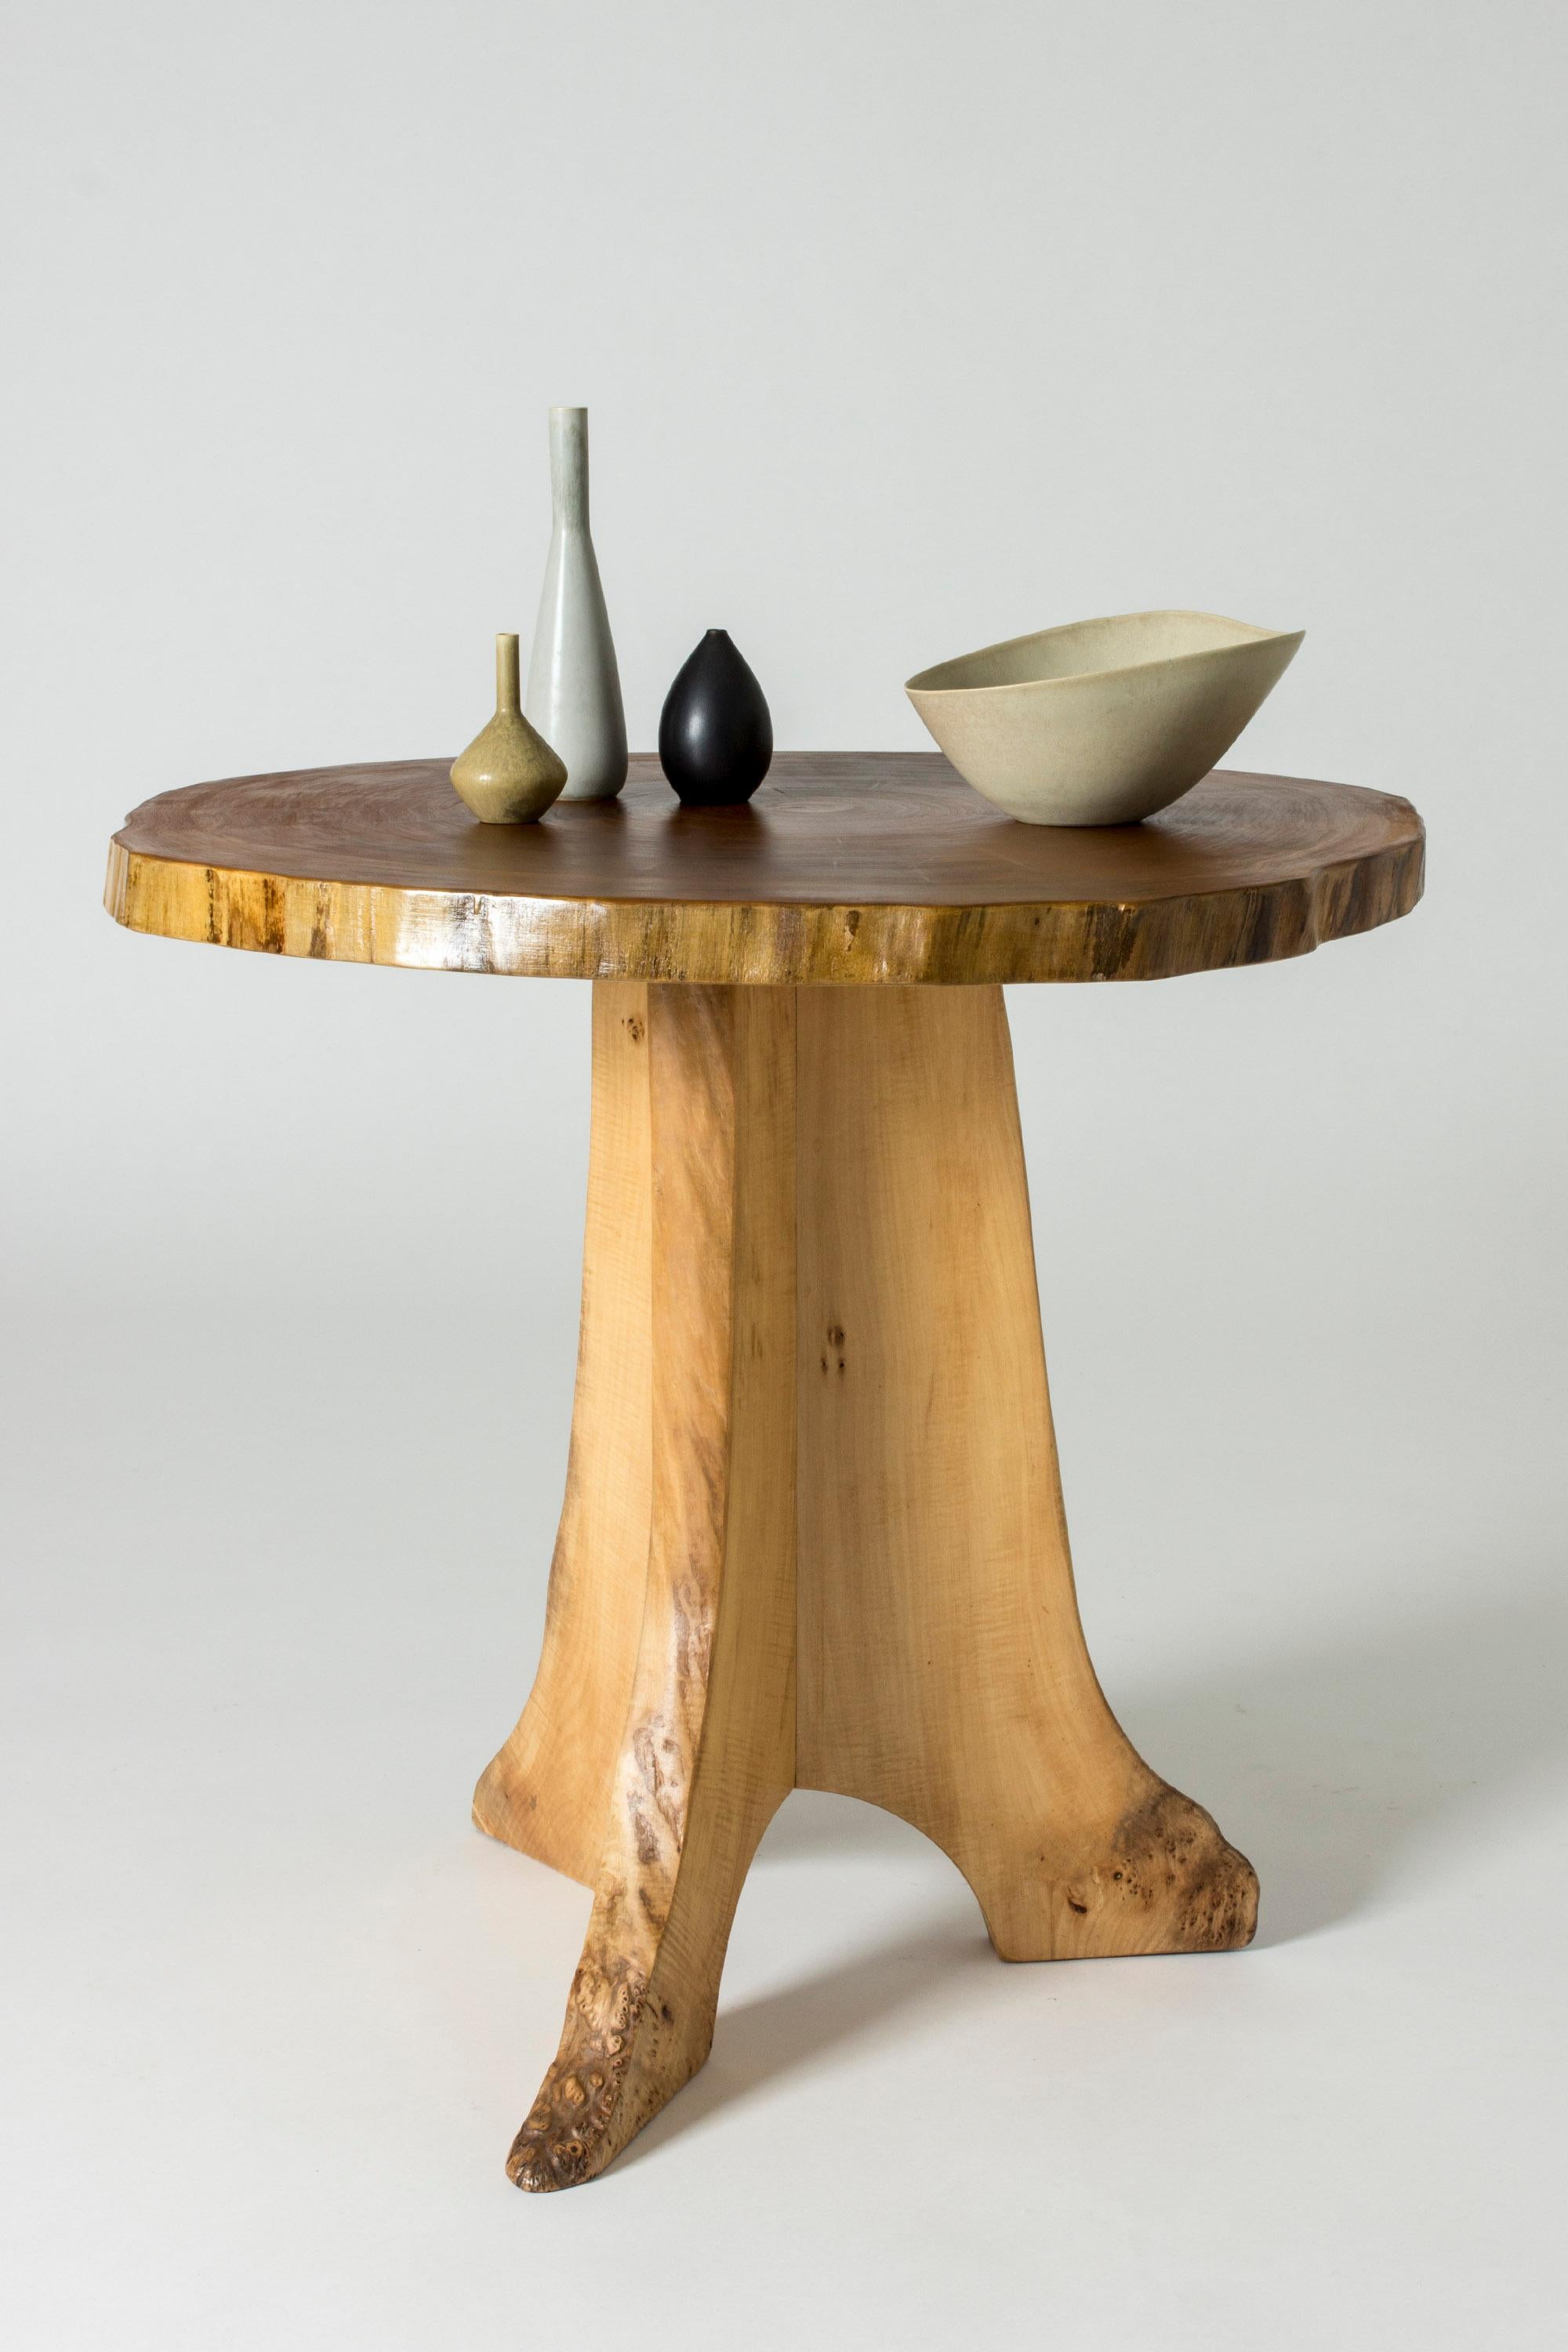 Organic occasional table by Sigvard Nilsson, made from poplar with a piedestal base. The table top is made of a sheet of a tree trunk that shows the annual rings. The base is made from pieces of wood where curves of the tree has been used to create